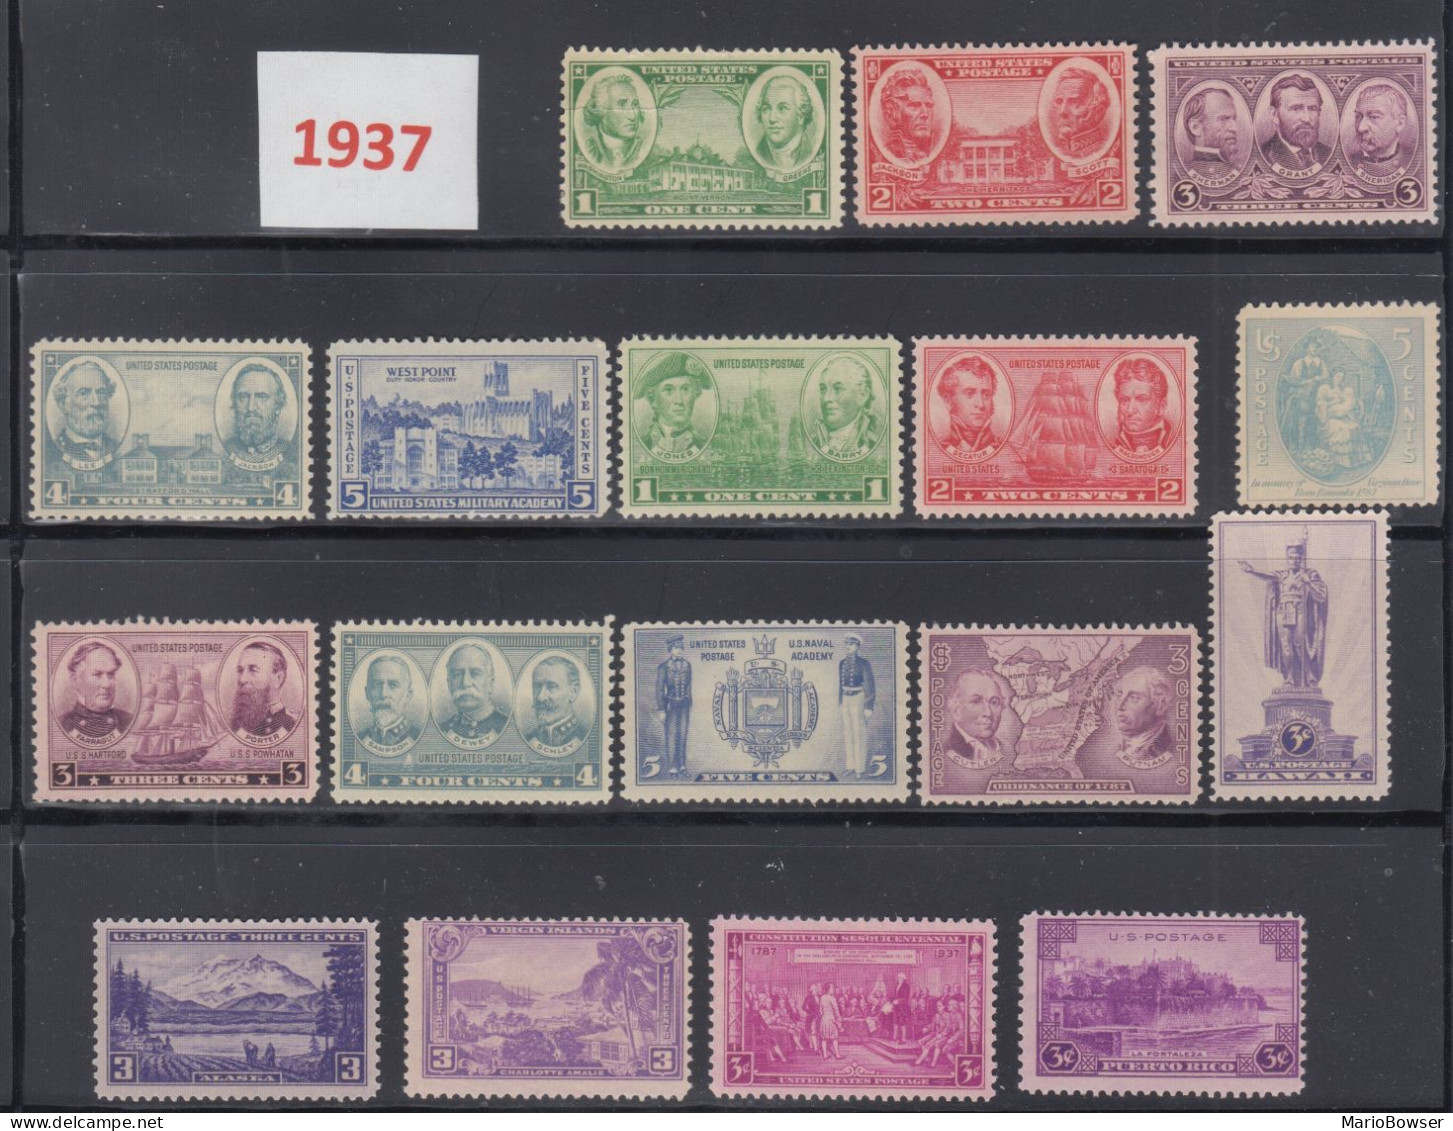 USA 1937 Full Year Commemorative MNH Stamps Set SC# 785-902 With 17 Stamps - Annate Complete